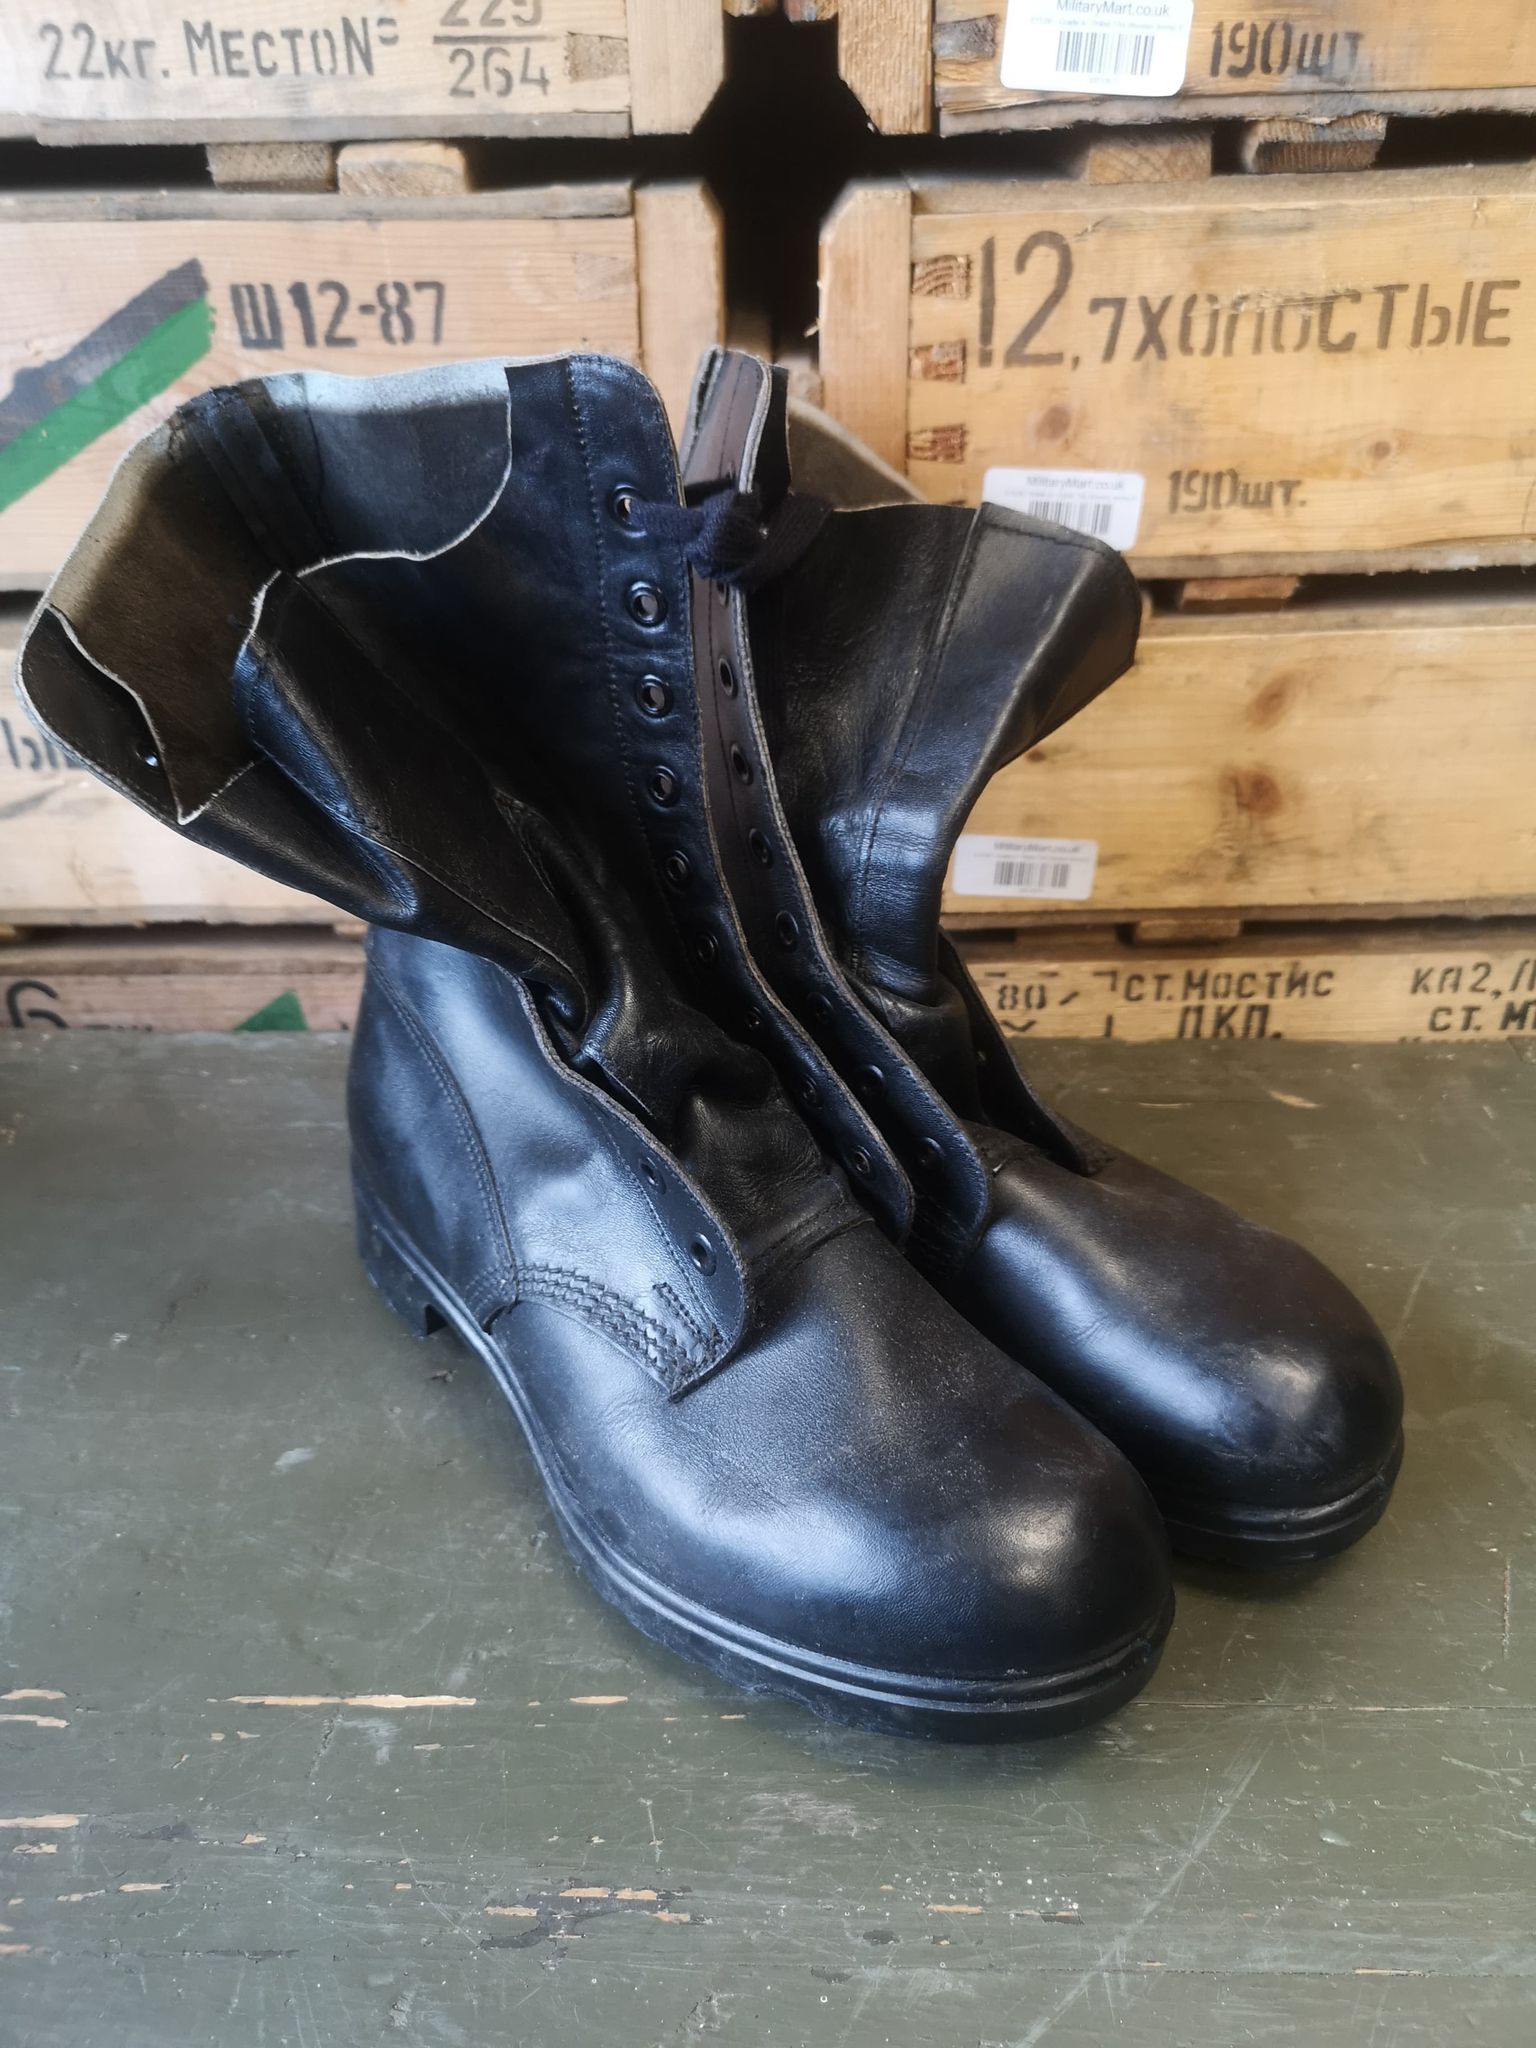 british army dms boots for sale